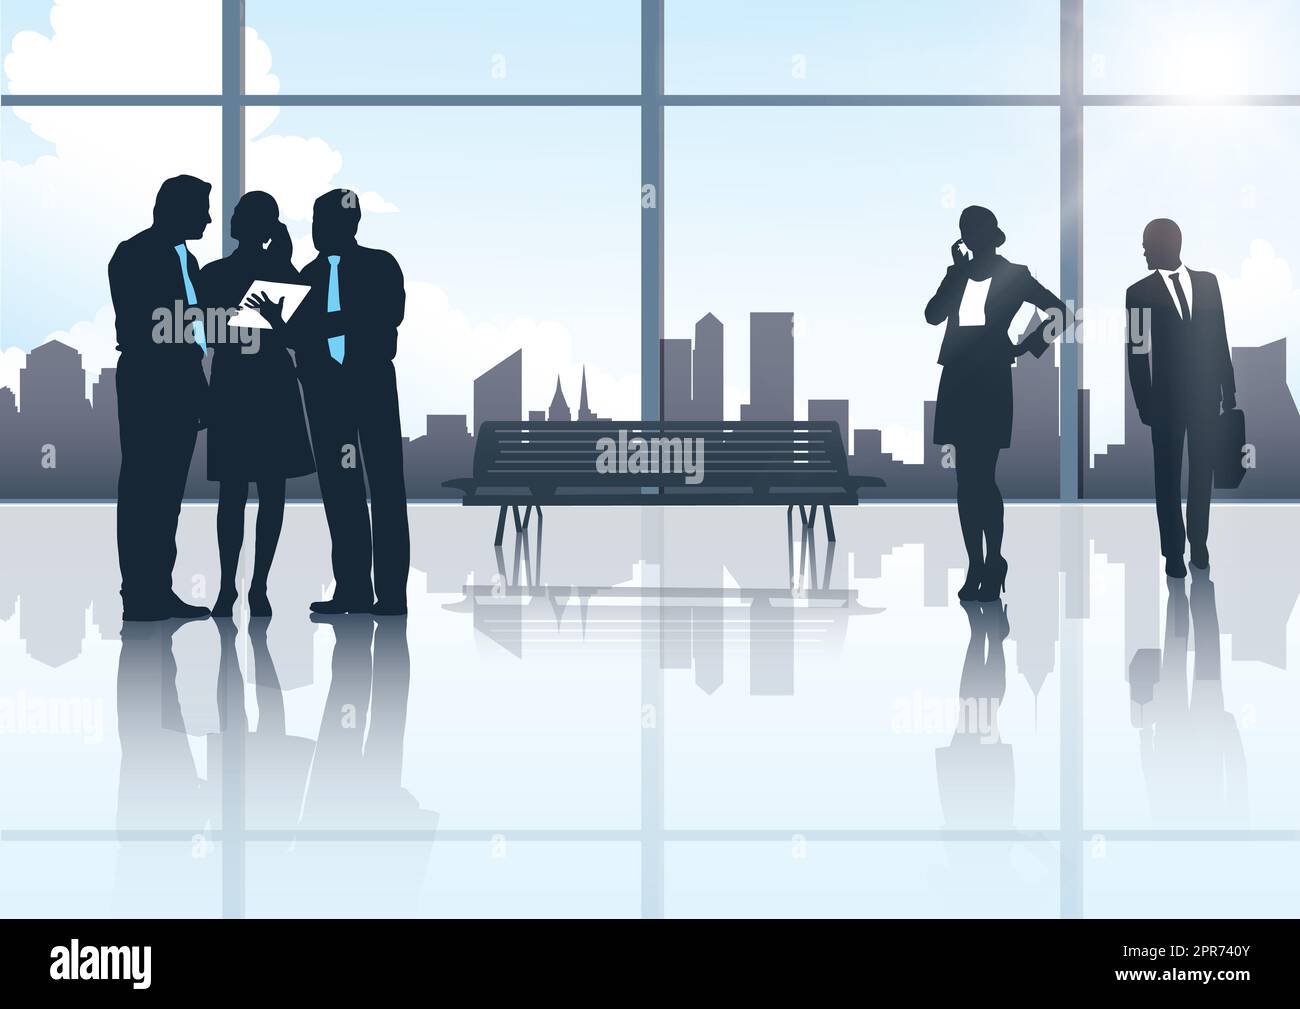 Doing business in the corporate world. Silhouettes of two groups of businesspeople against a city scape. Stock Photo